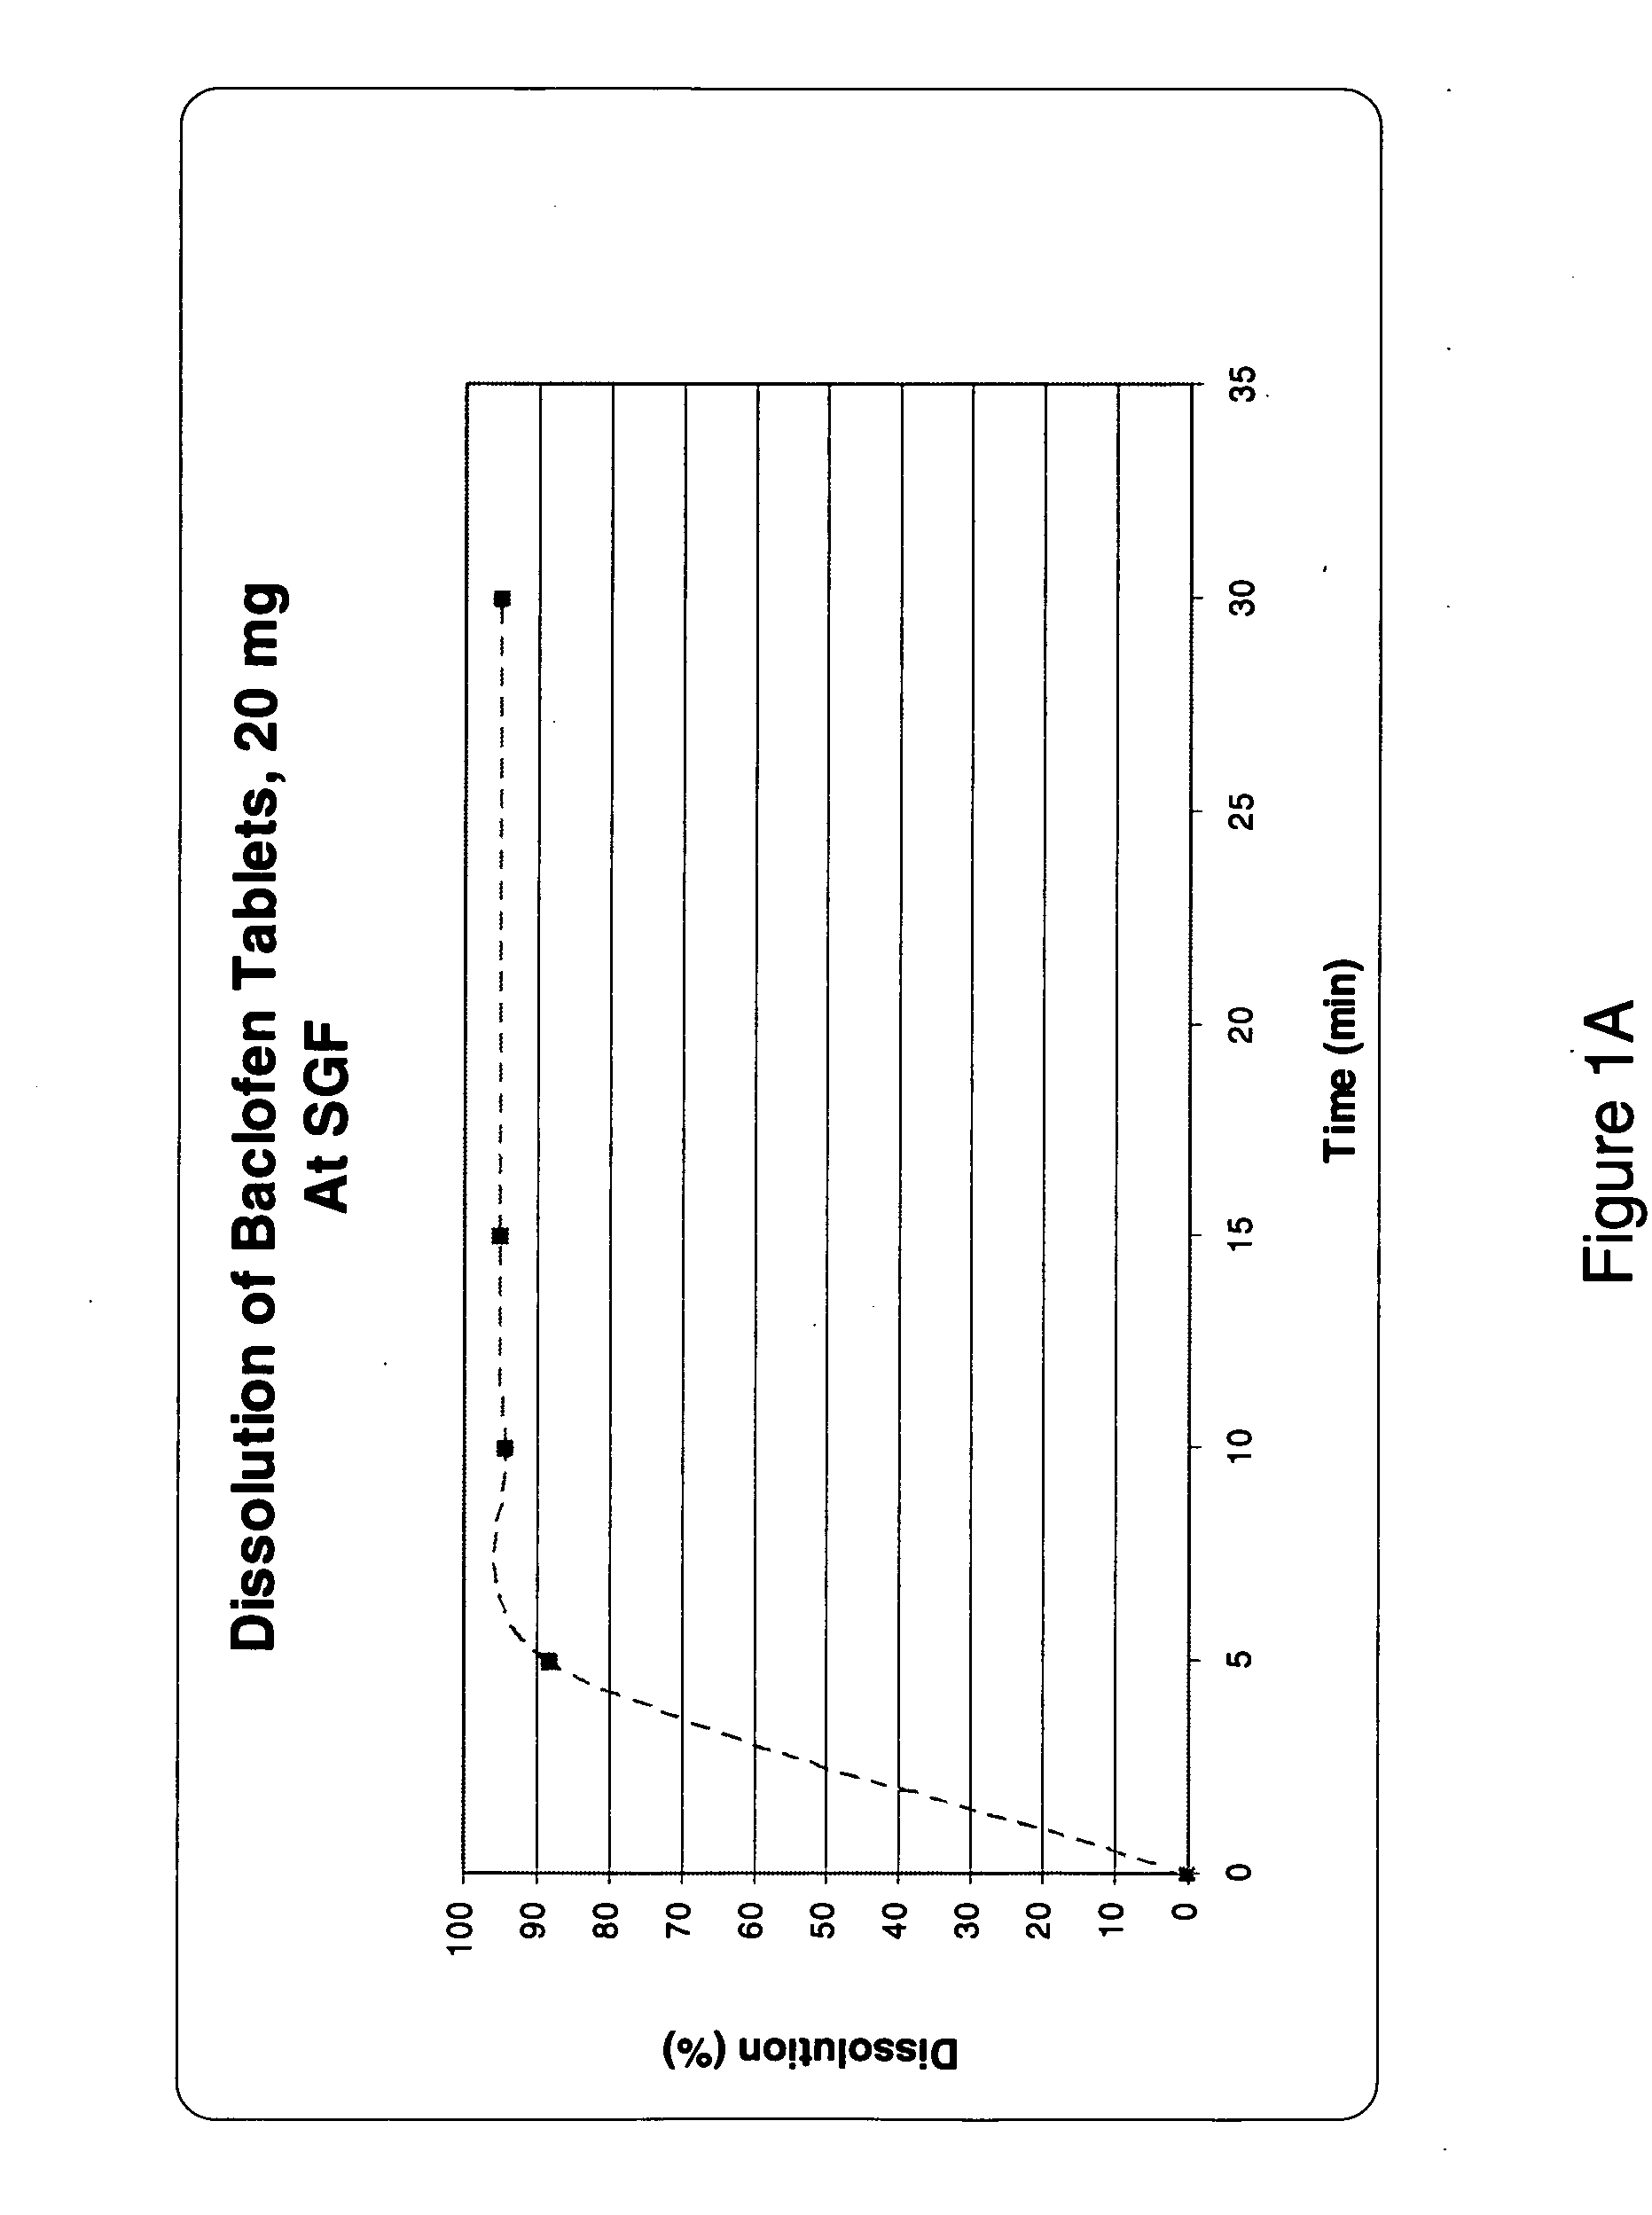 Pharmaceutical dosage forms having immediate release and/or controlled release properties that contain a GABAB receptor agonist